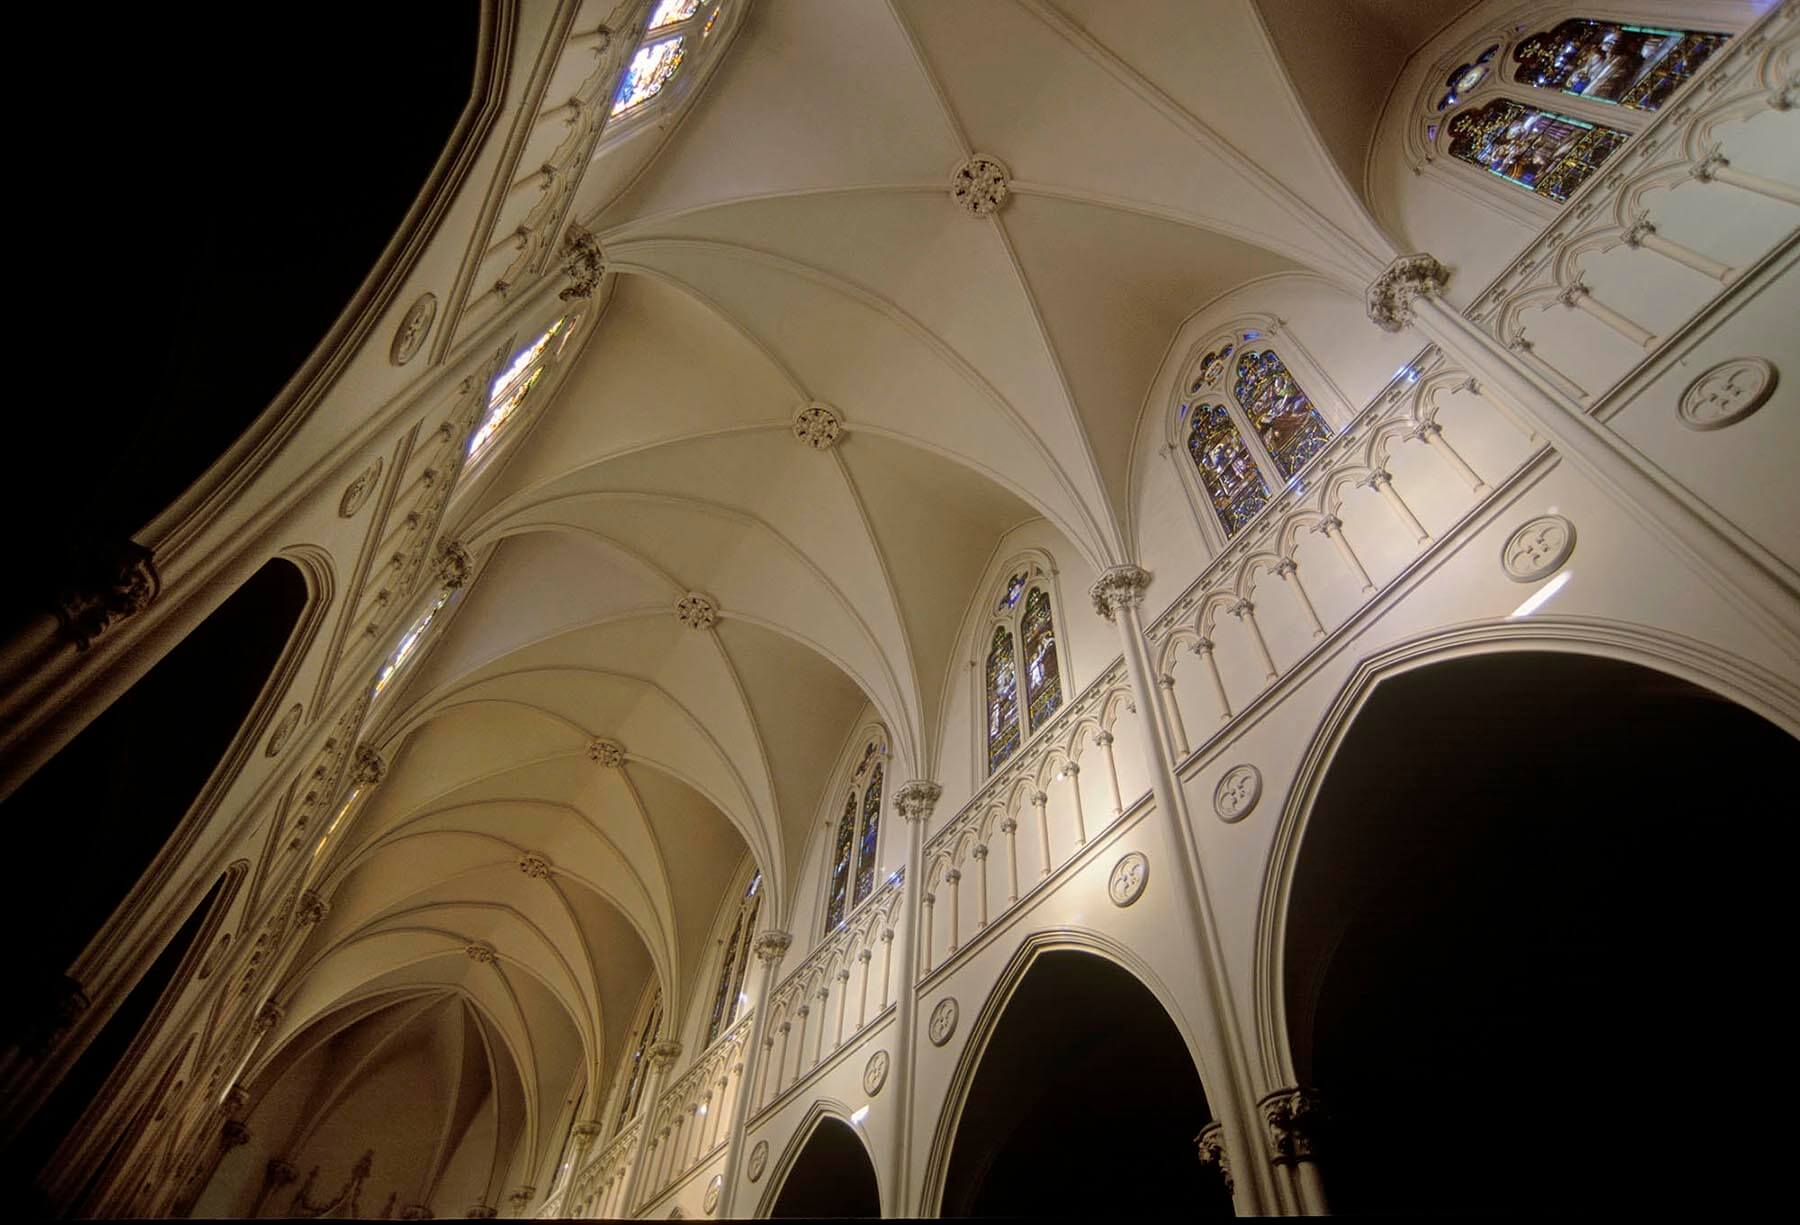 VAULTED CEILING of a historical church in SANTIAGO, CHILE. - Architecture photography by Eagle Visions Photography